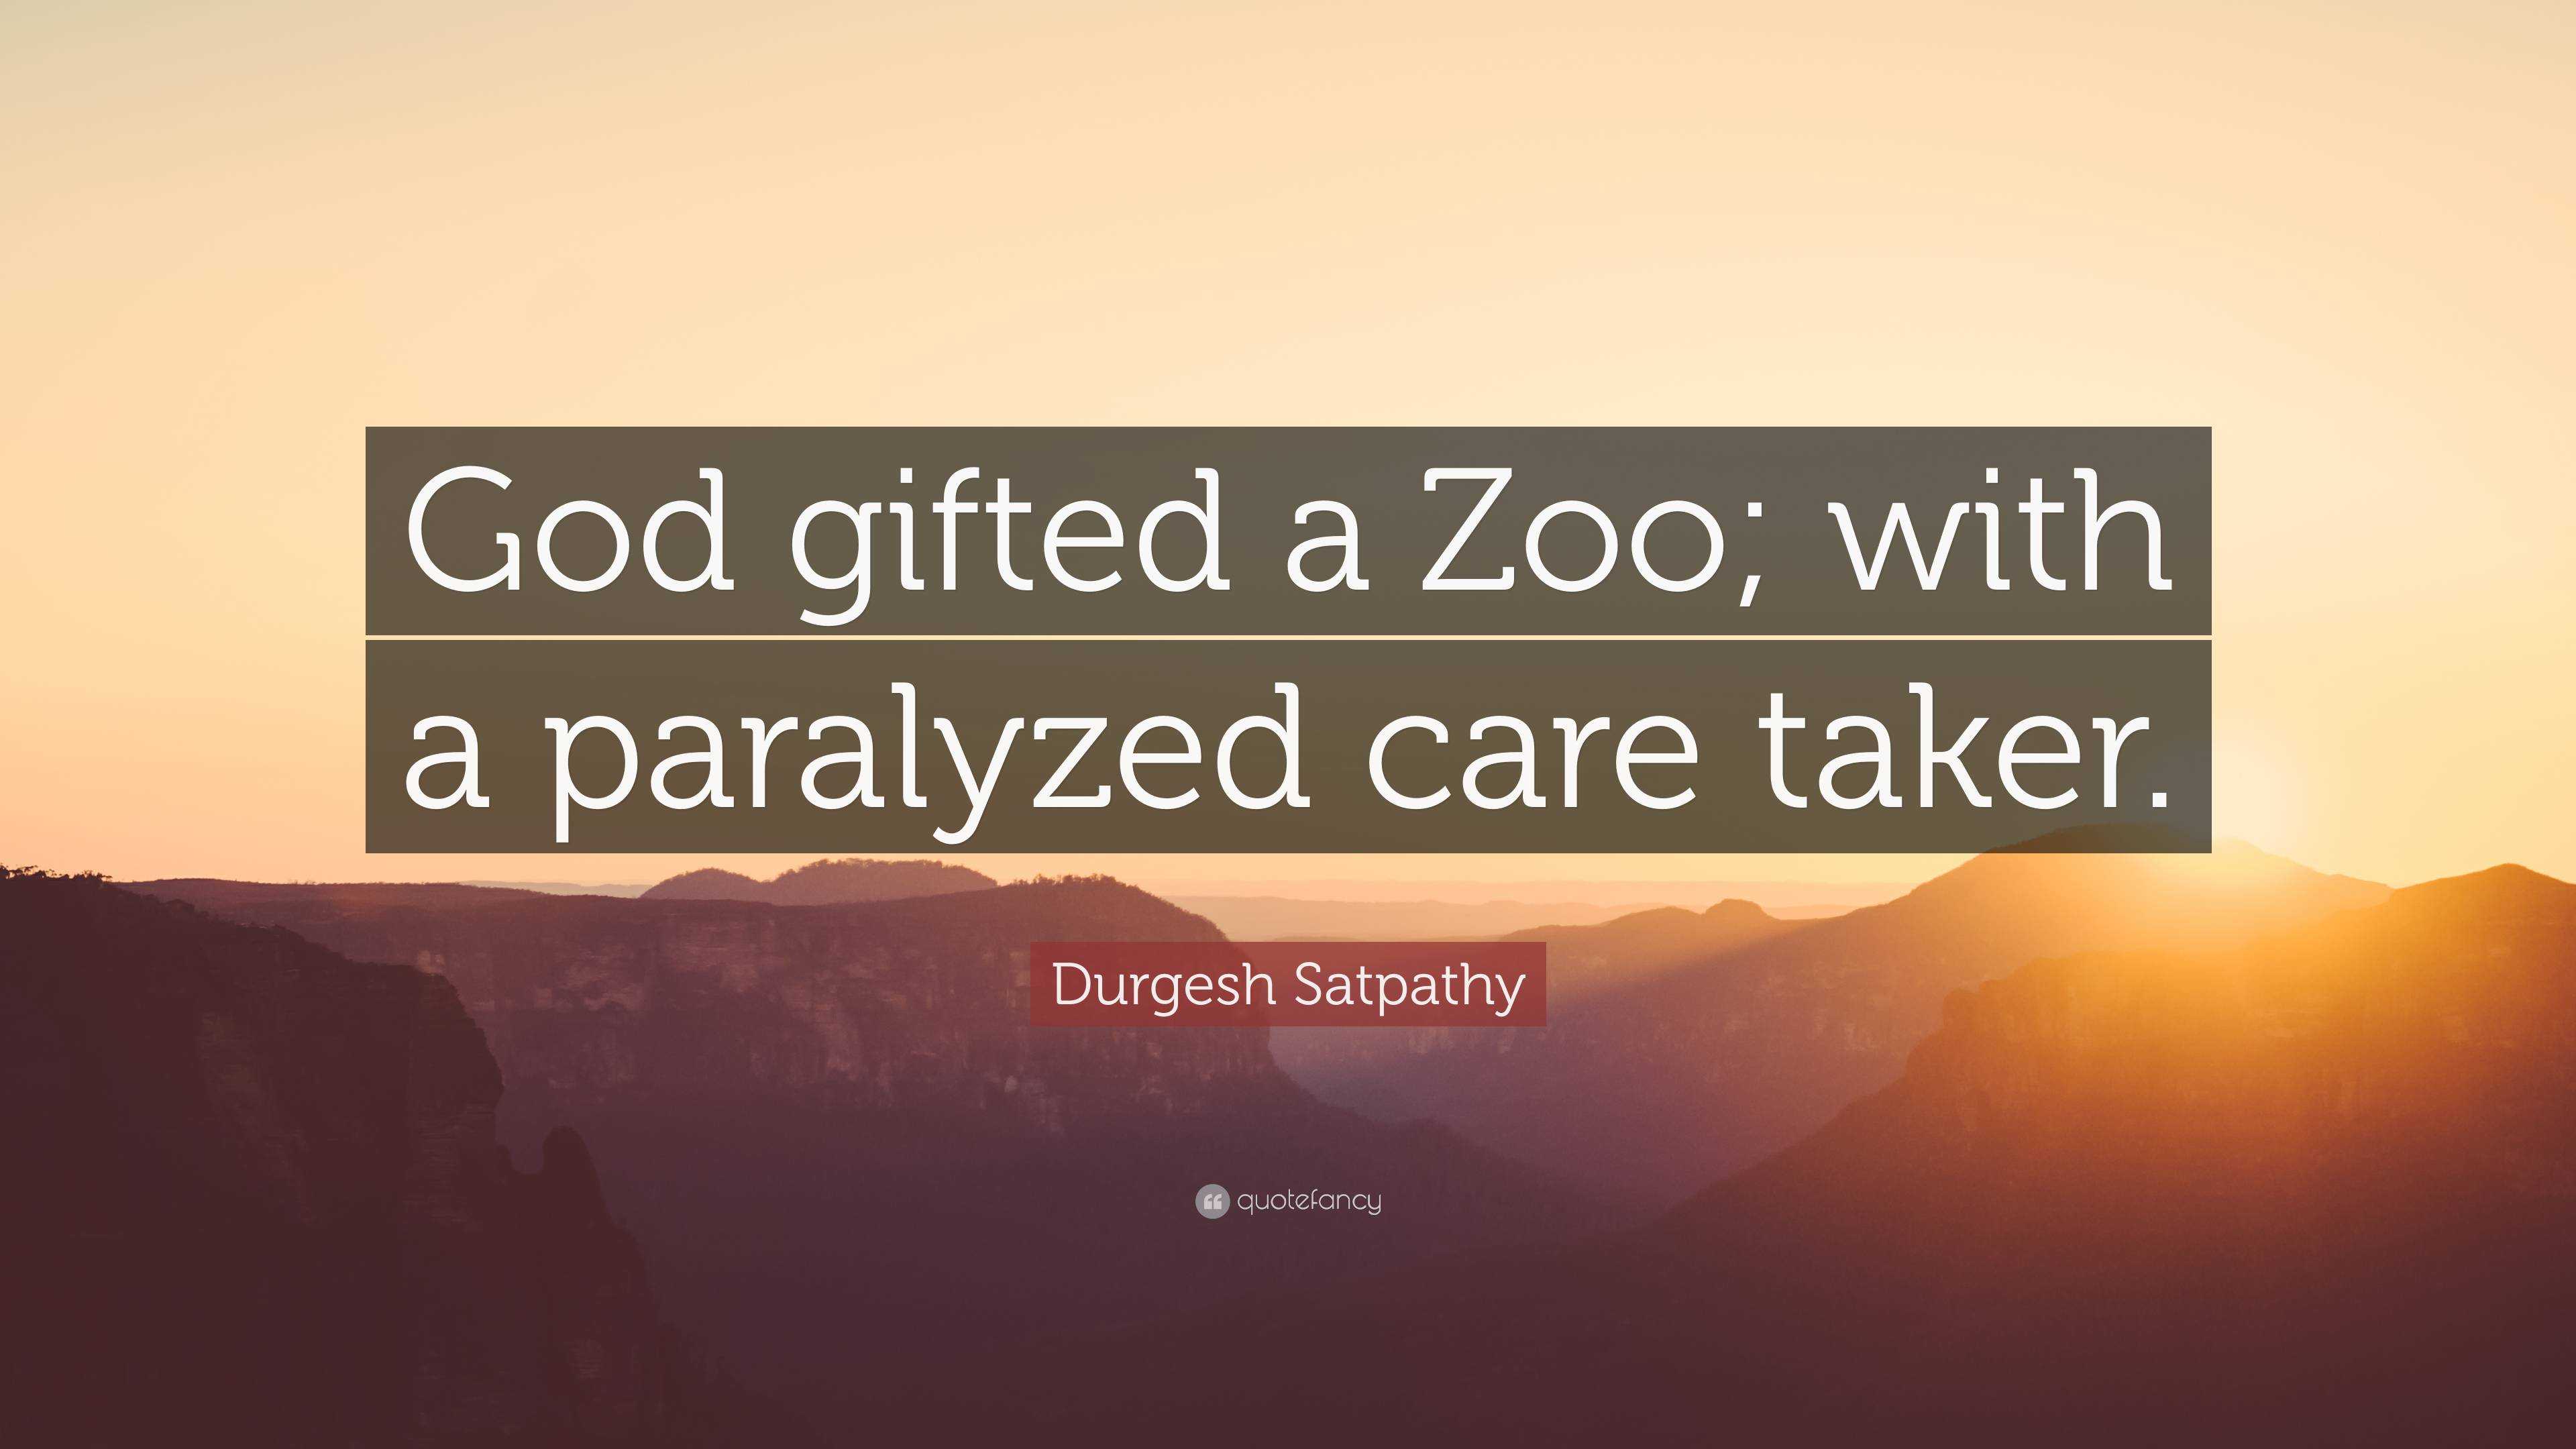 Durgesh Satpathy Quote: “God gifted a Zoo; with a paralyzed care taker.”